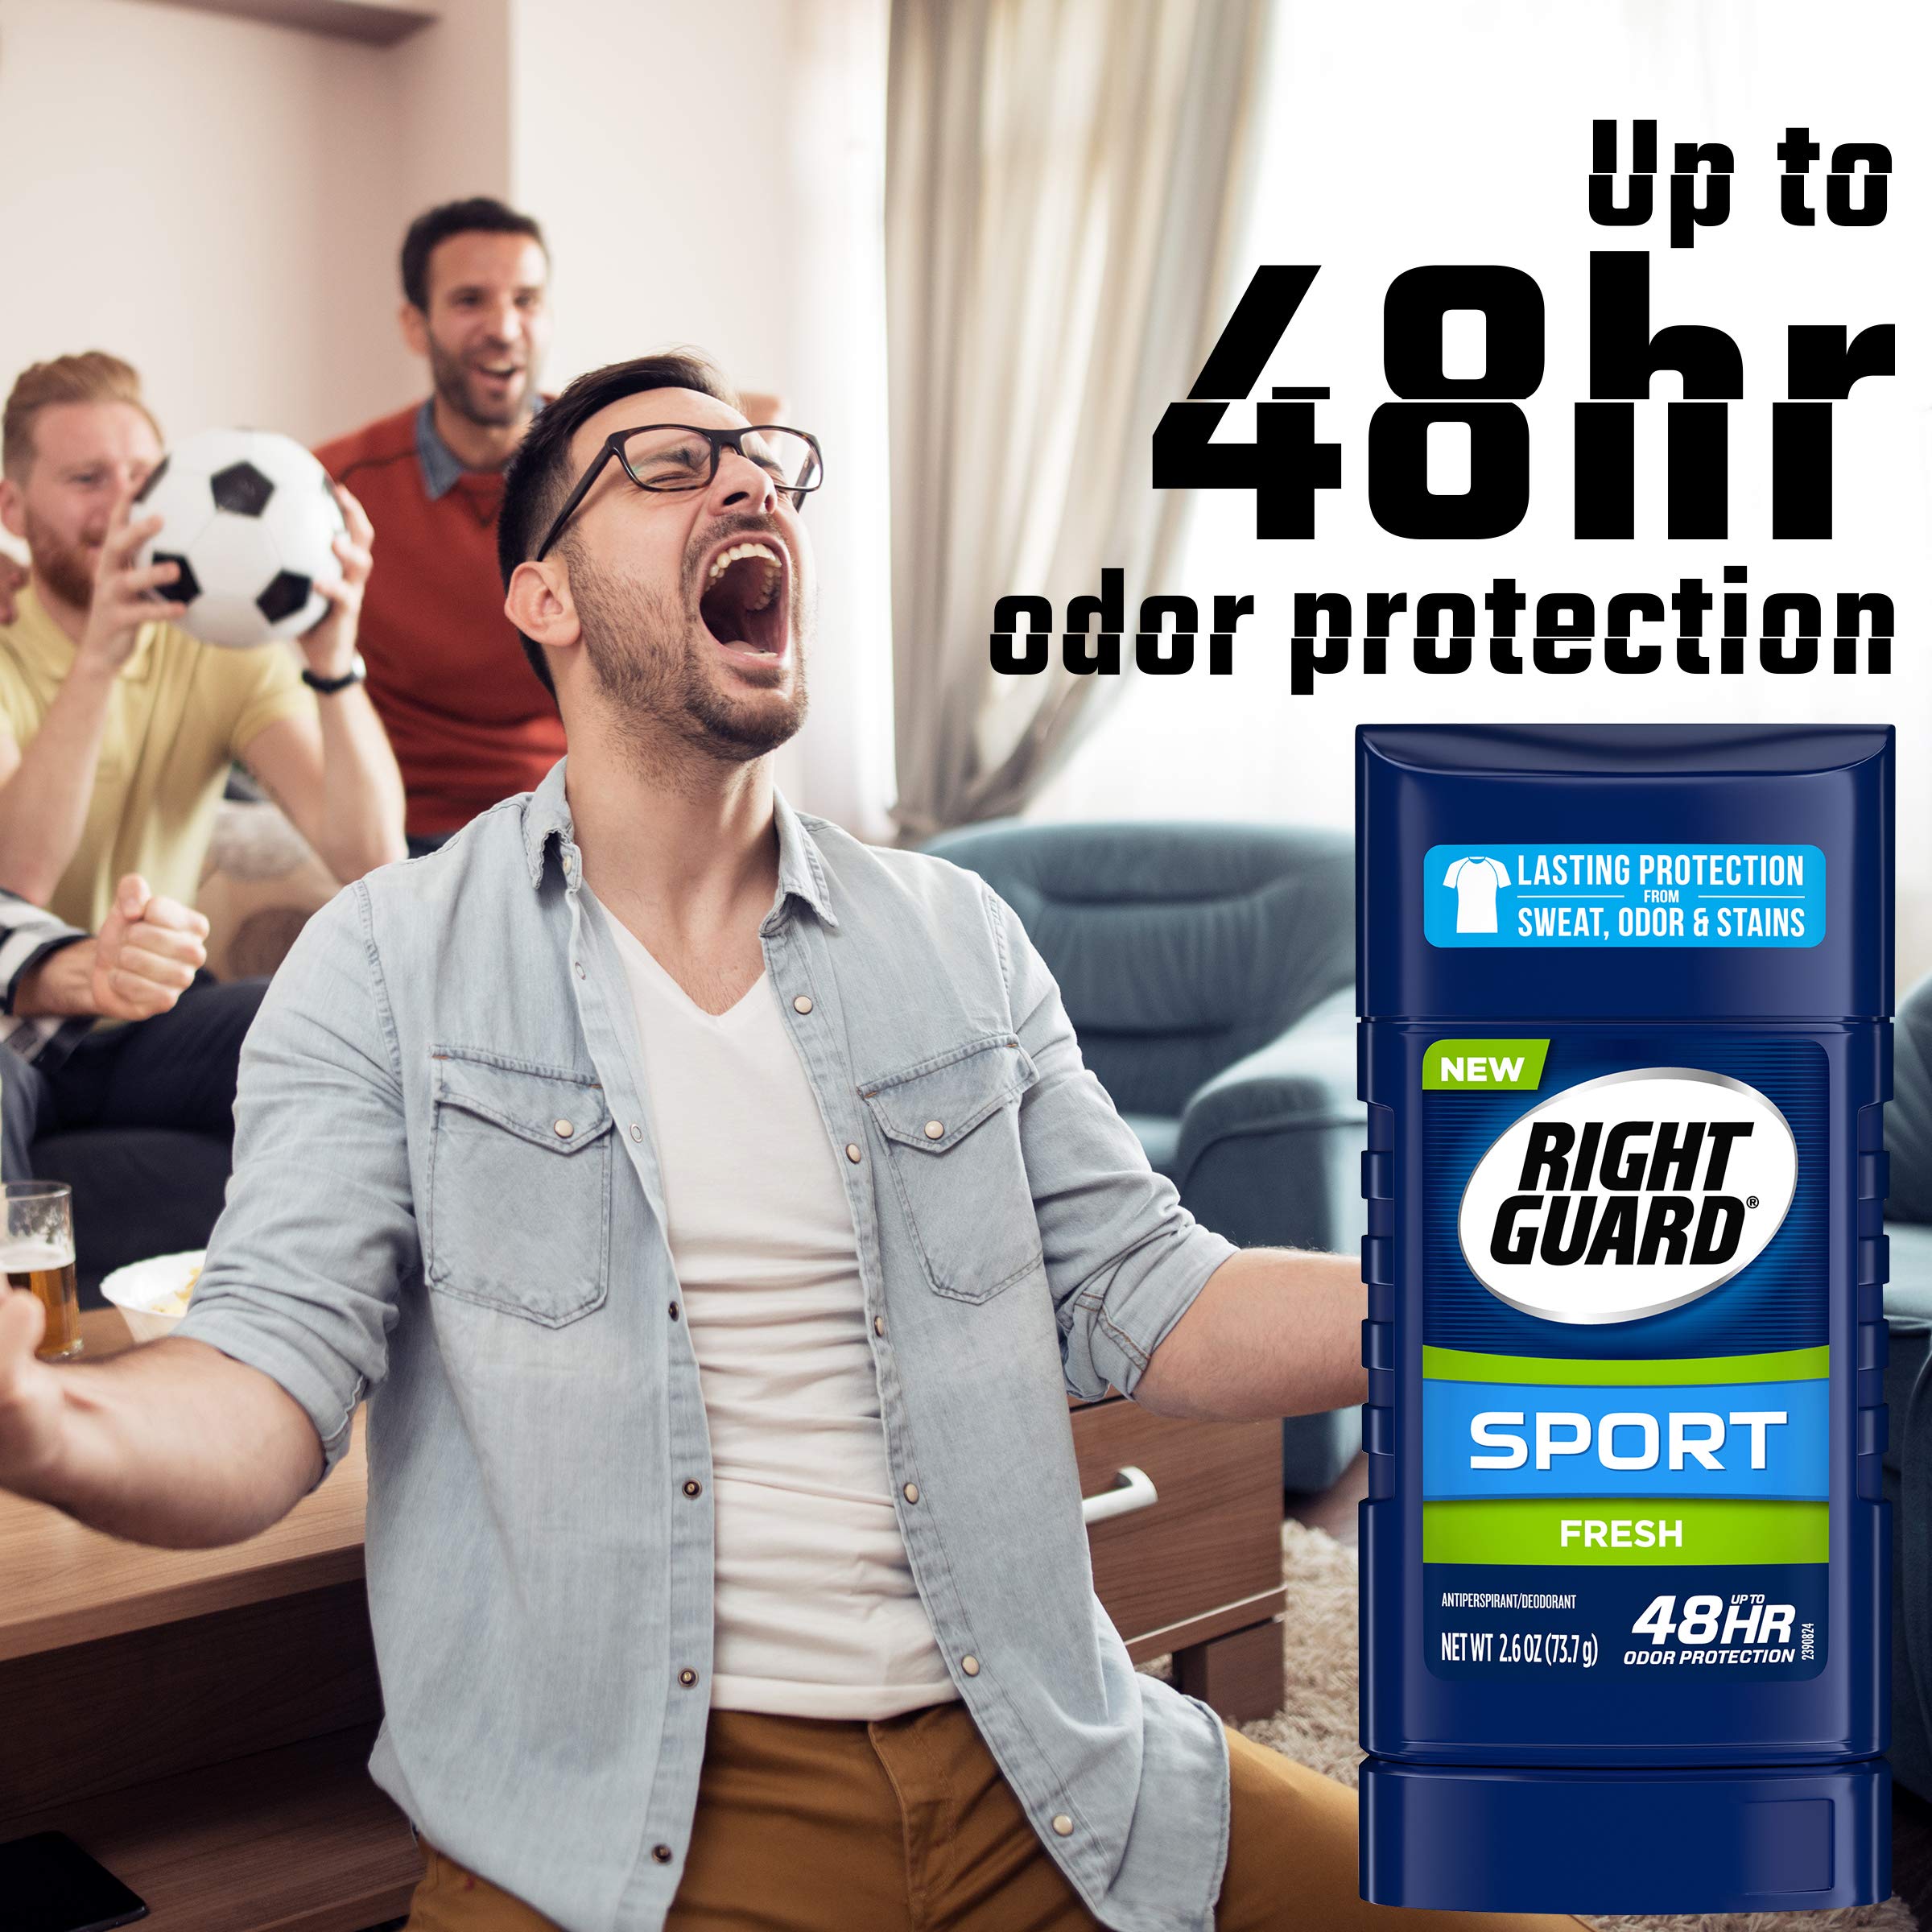 Right Guard Sport Antiperspirant Up To 48HR, Fresh, 2.6 Oz (Pack of 6)